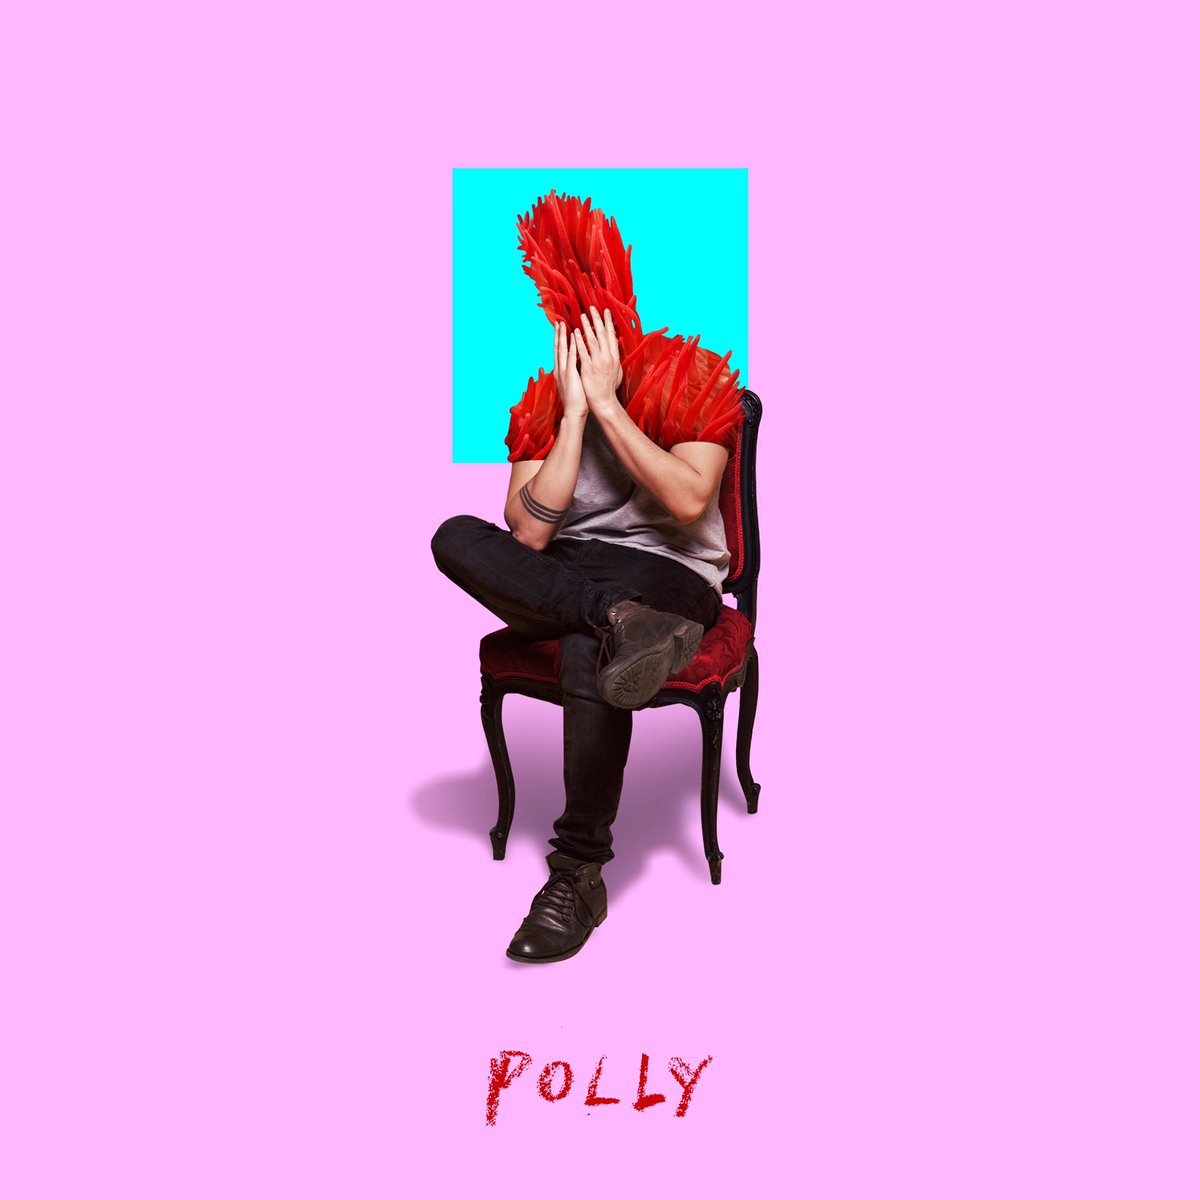 Polly is finally out! 
kiolmusic.lnk.to/polly-free-lis…
@MuseBoost @NewMusicUSA @ohpolly #NewSong #IndieArtists #diymusicchat @mojosarmy #fridaypromo #SongOfTheDay #nowplaying #indipendentmusic #singersongwriter #alternative #pop #rock